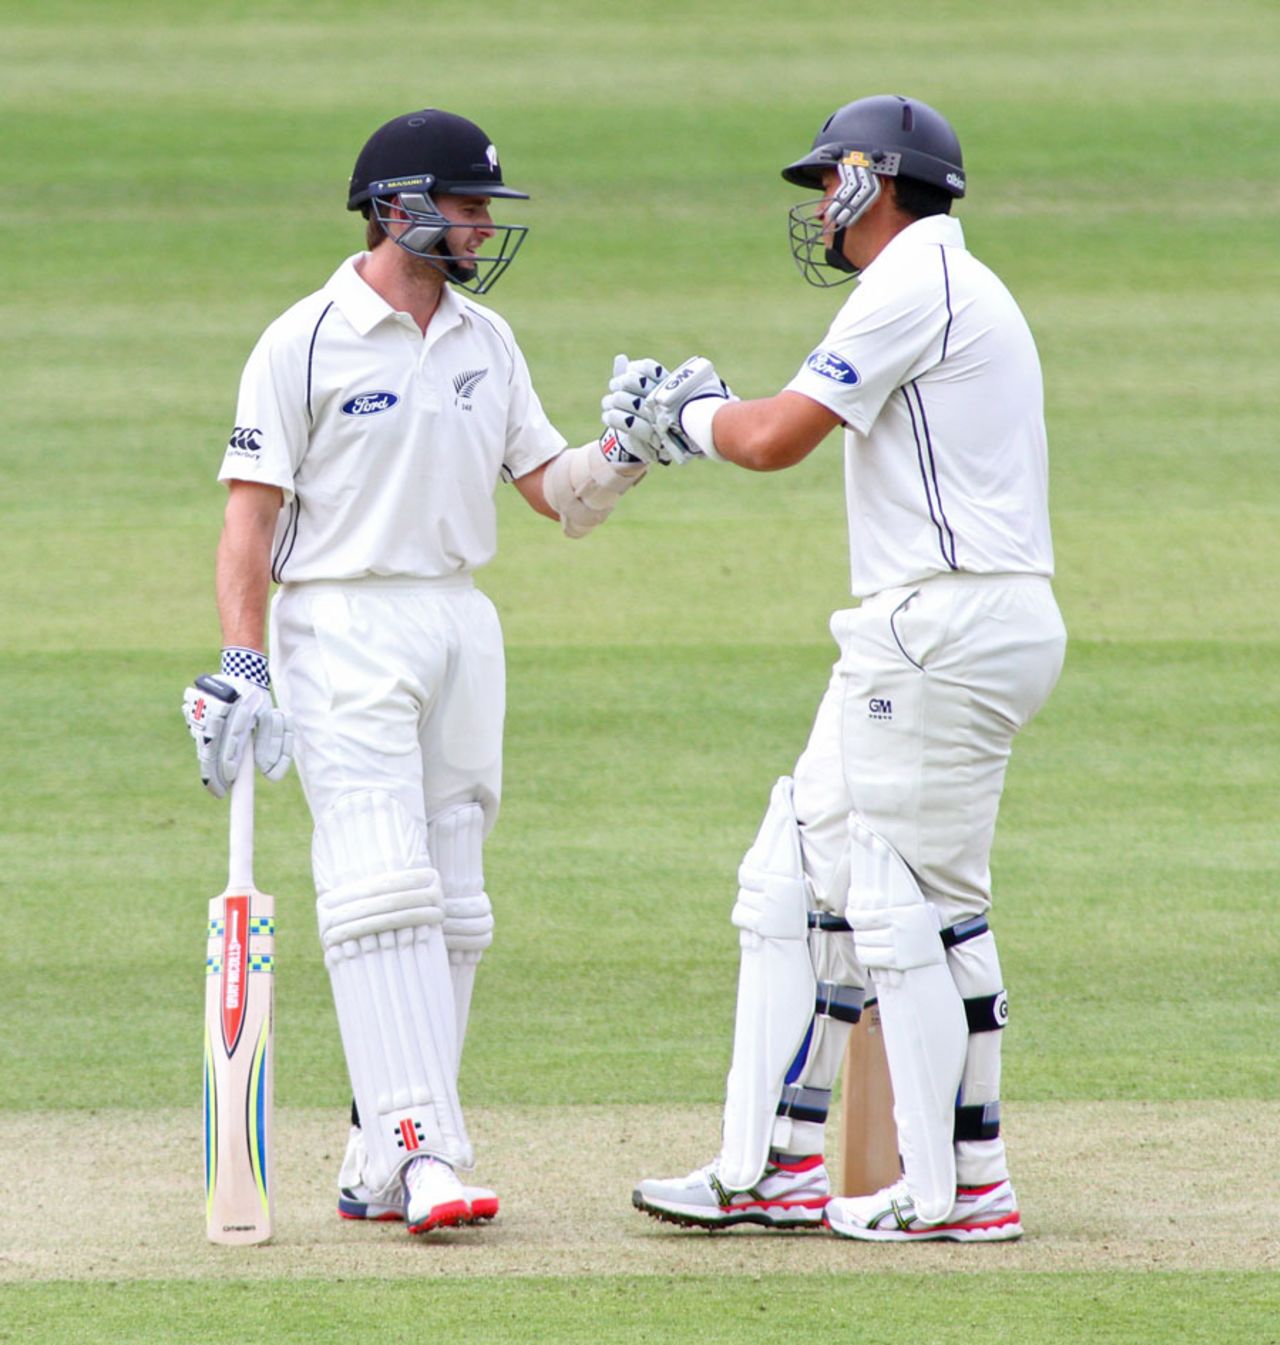 Kane Williamson and Ross Taylor put on a century stand, England v New Zealand, 1st Investec Test, Lord's, 2nd day, May 22, 2015